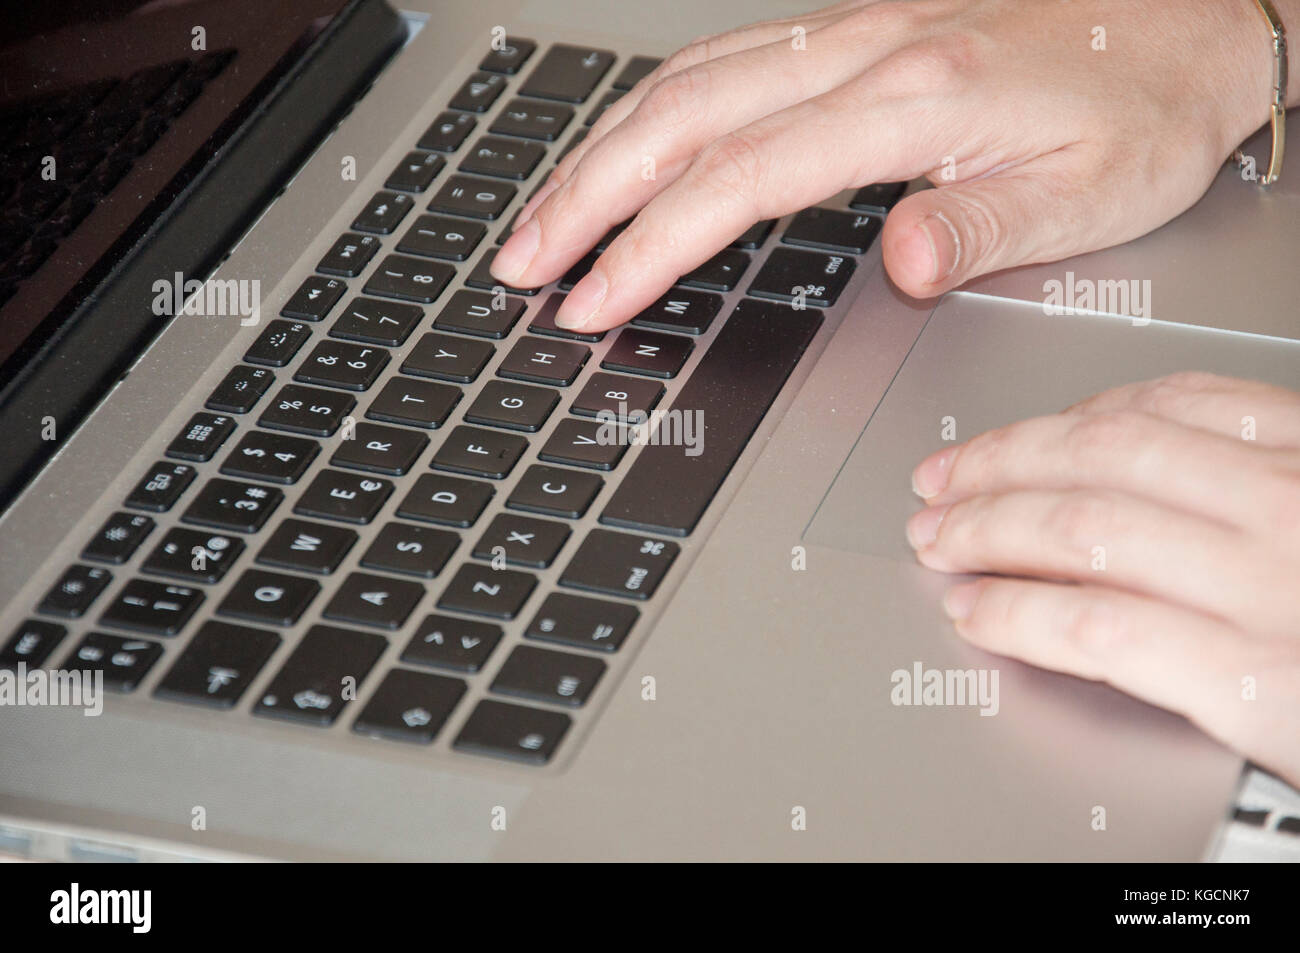 Woman hands using a laptop keyboard Stock Photo